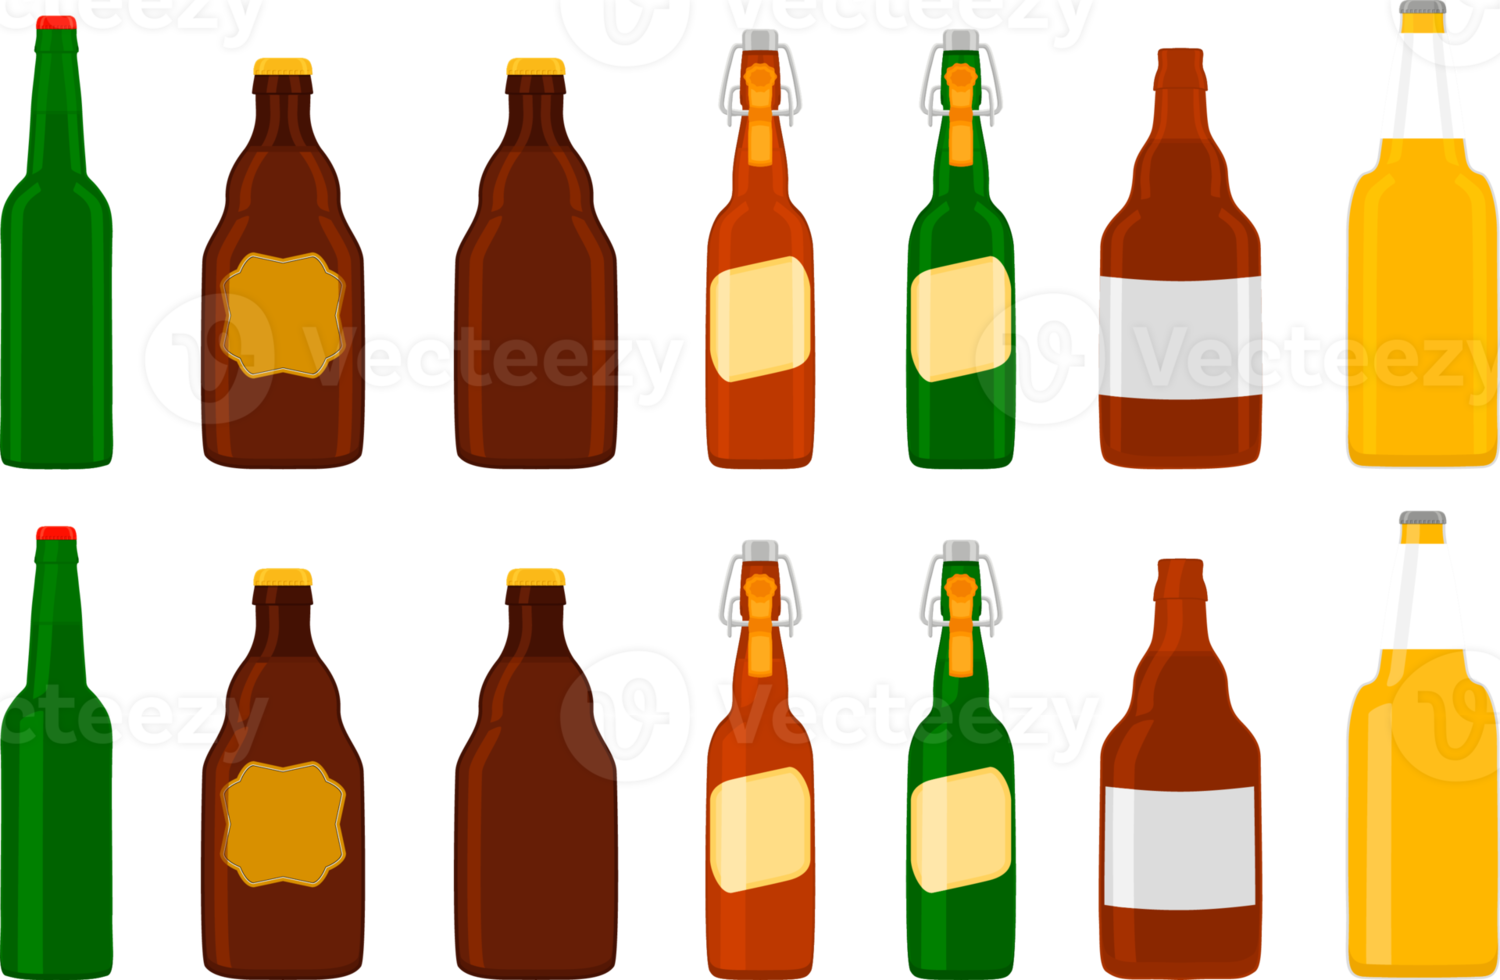 https://static.vecteezy.com/system/resources/previews/017/303/612/non_2x/big-kit-beer-glass-bottles-with-lid-for-brewery-png.png